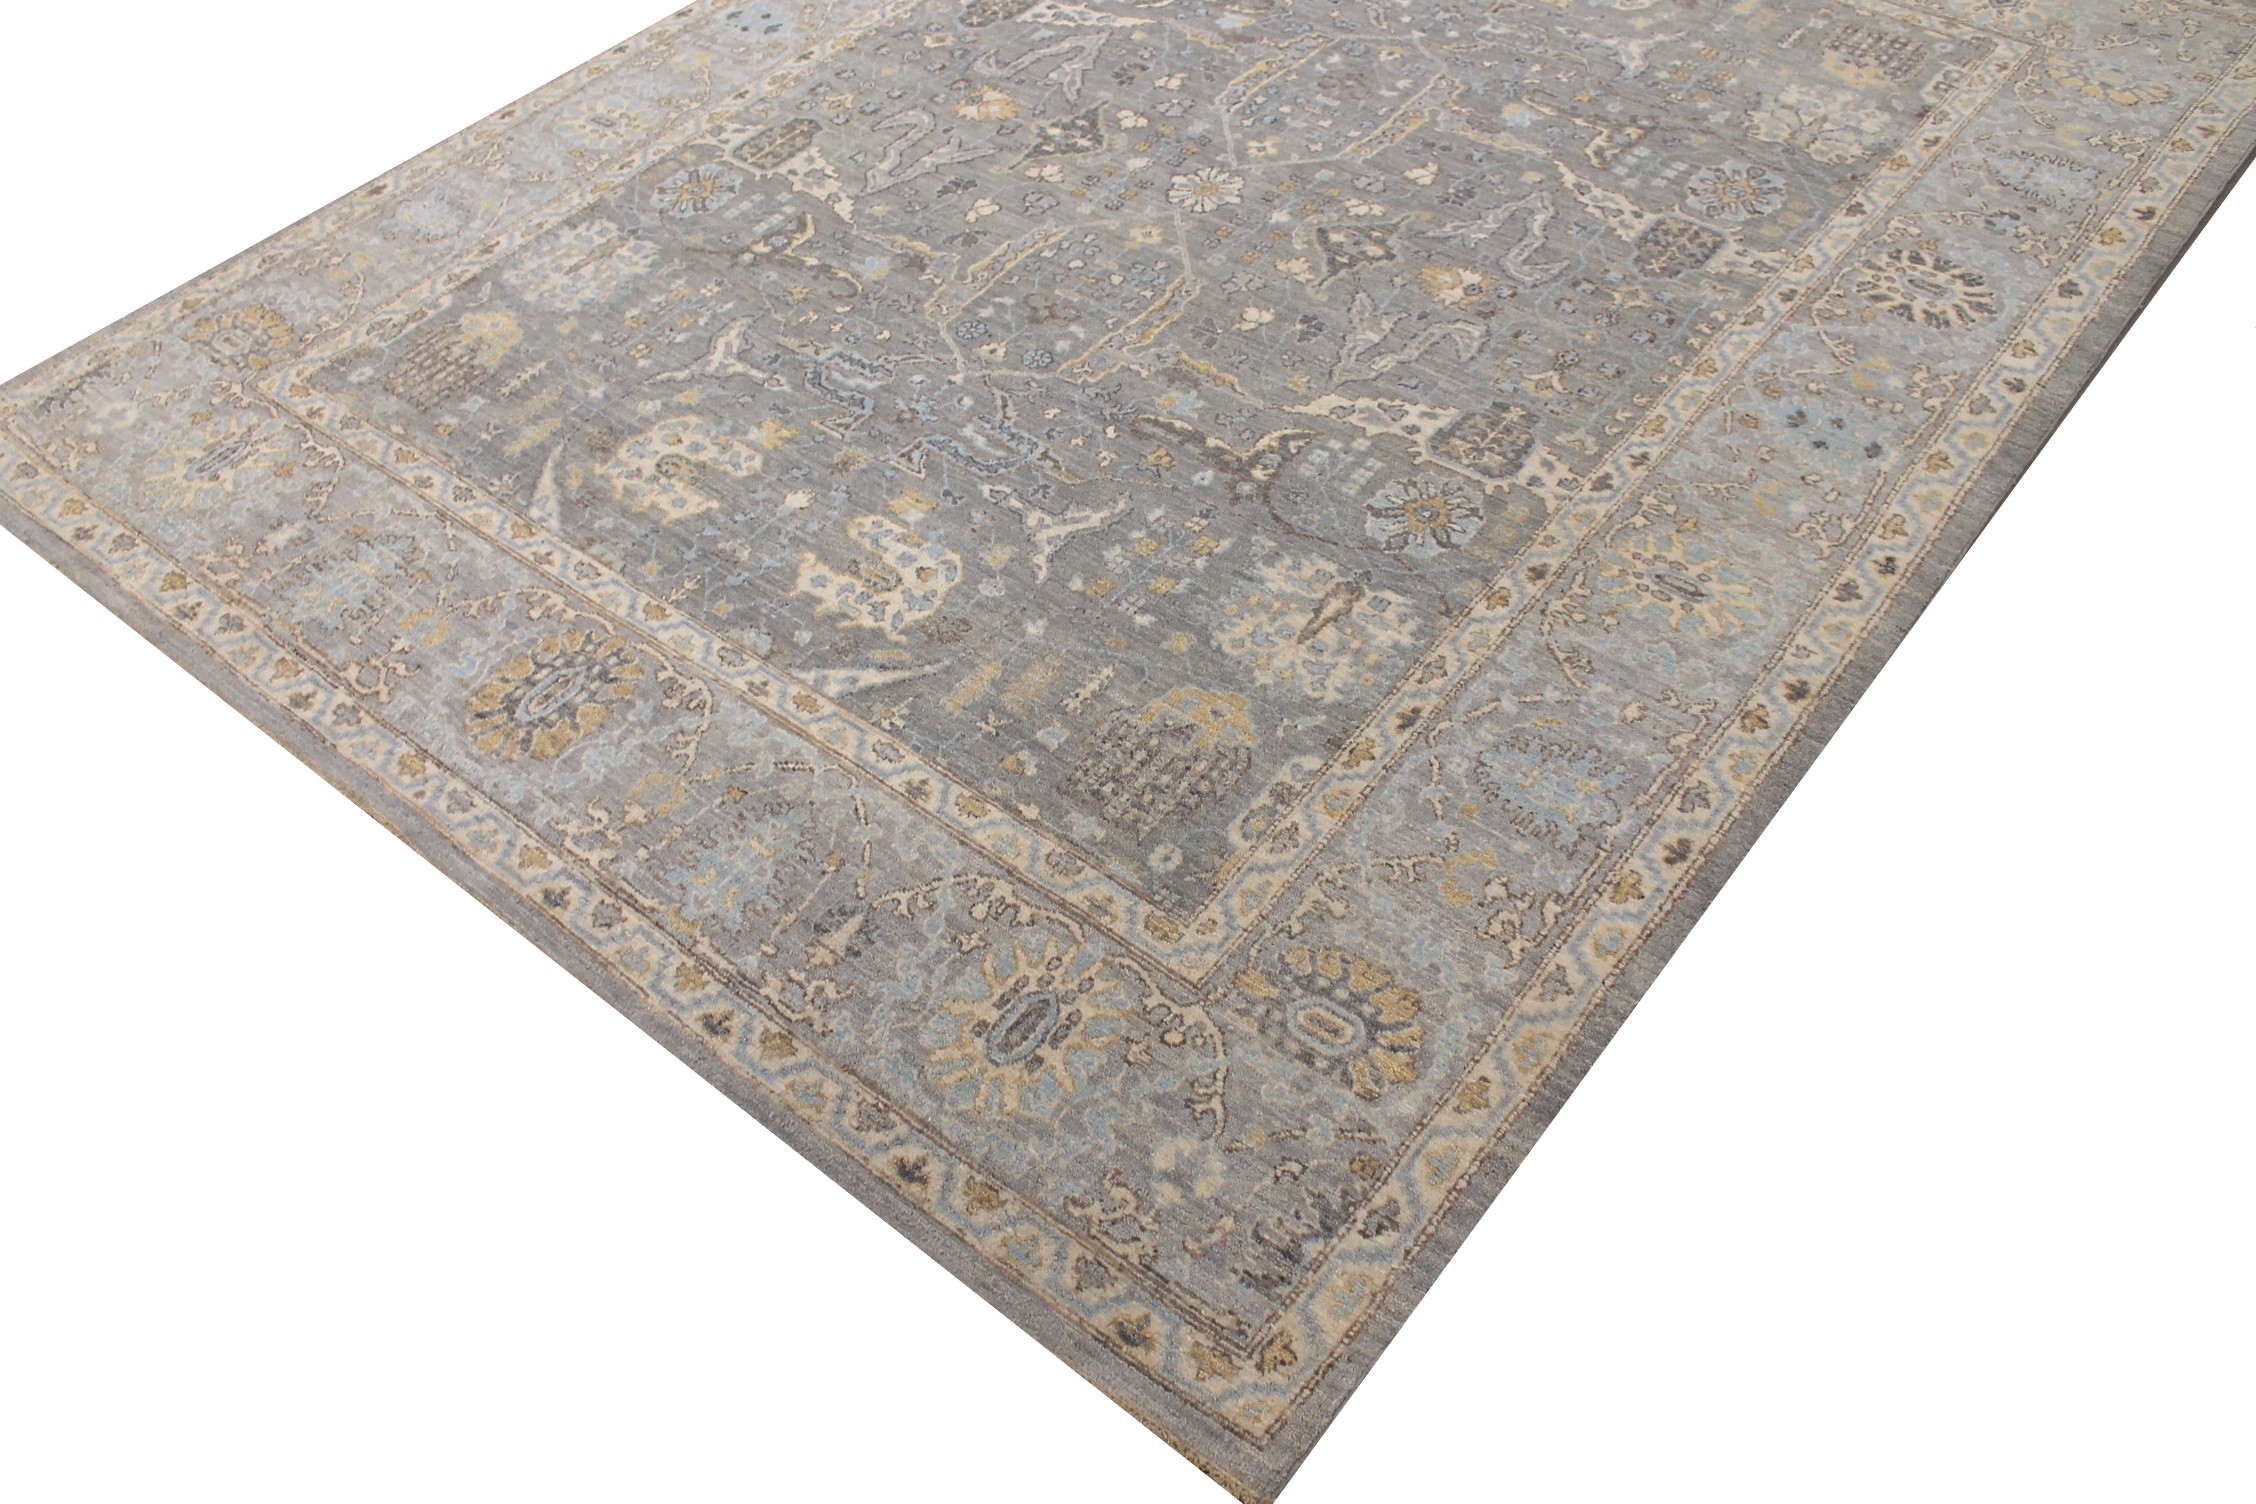 8x10 Peshawar Hand Knotted Wool Area Rug - MR027812